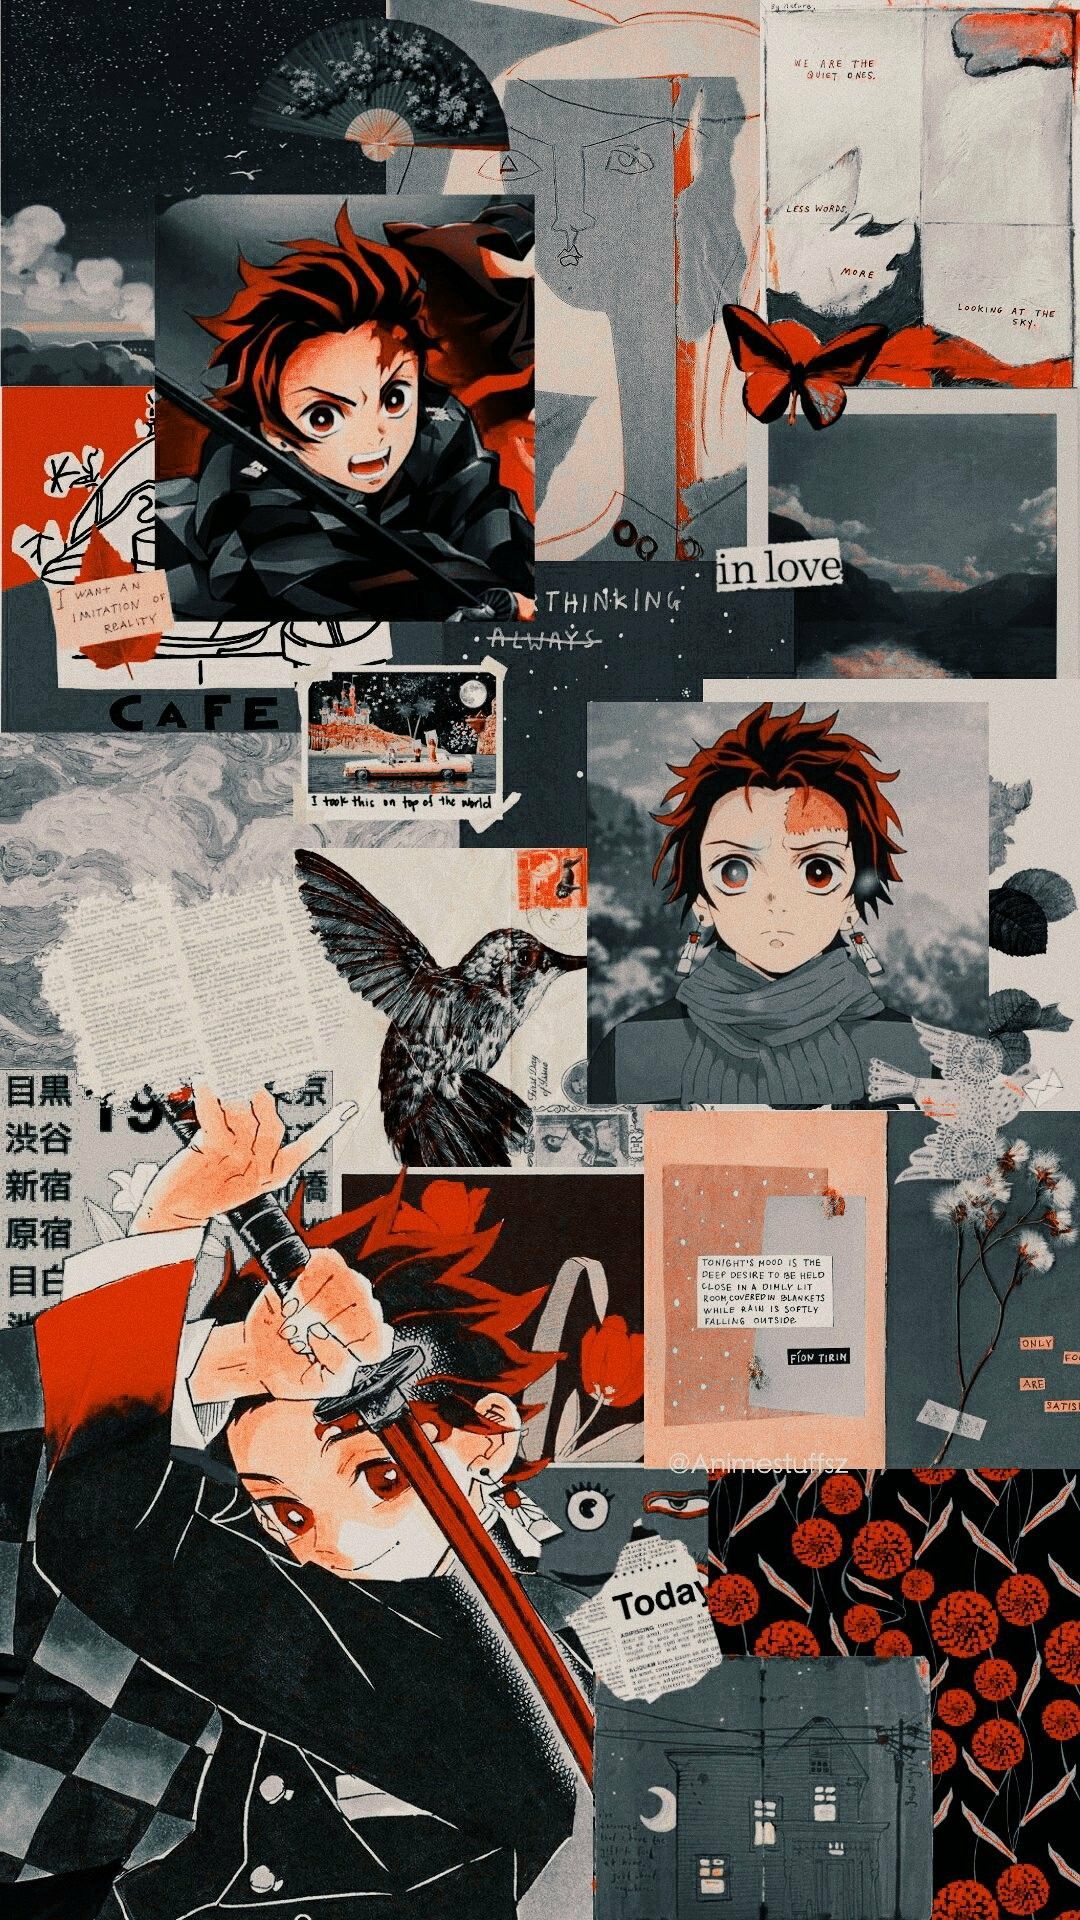 A collage of images with anime characters - Demon Slayer